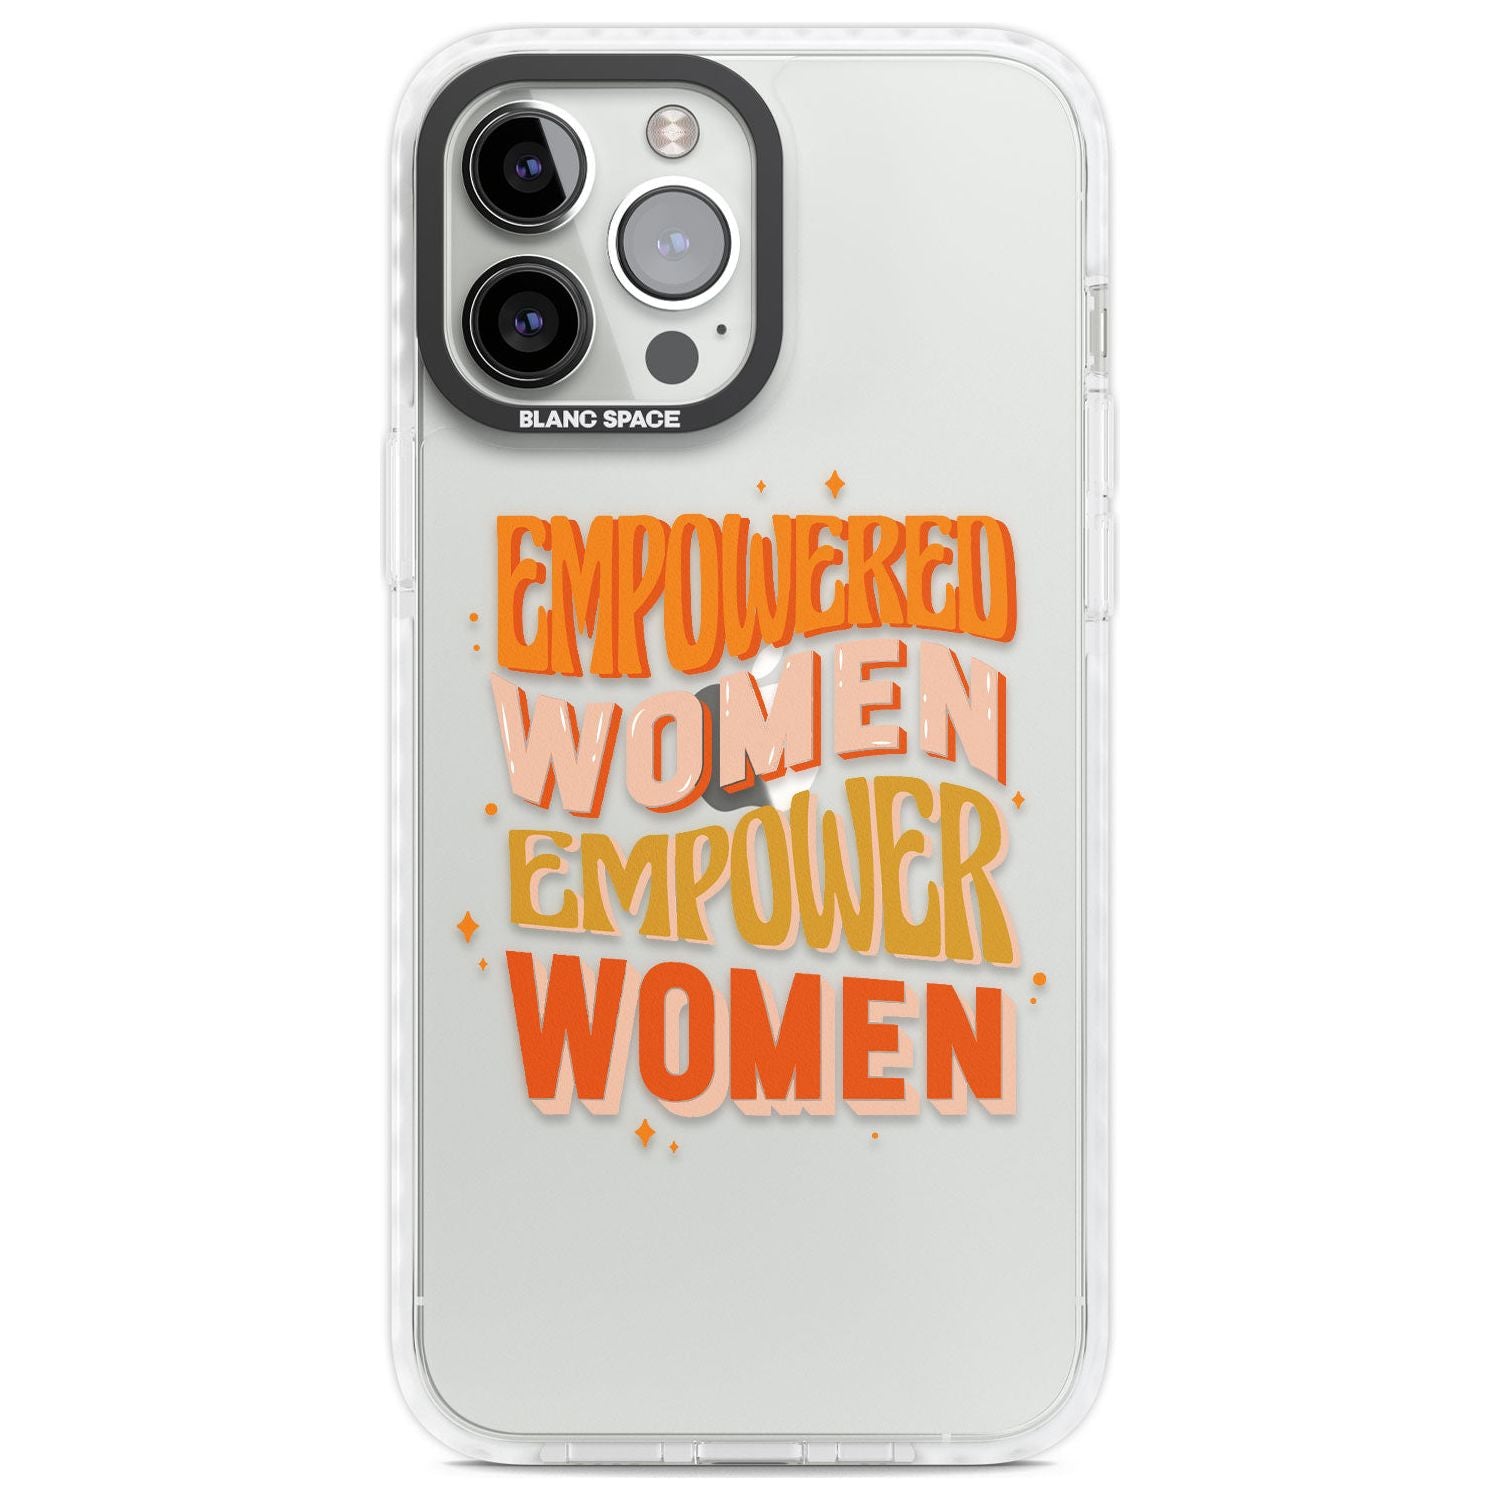 Empowered Women Phone Case iPhone 13 Pro Max / Impact Case,iPhone 14 Pro Max / Impact Case Blanc Space